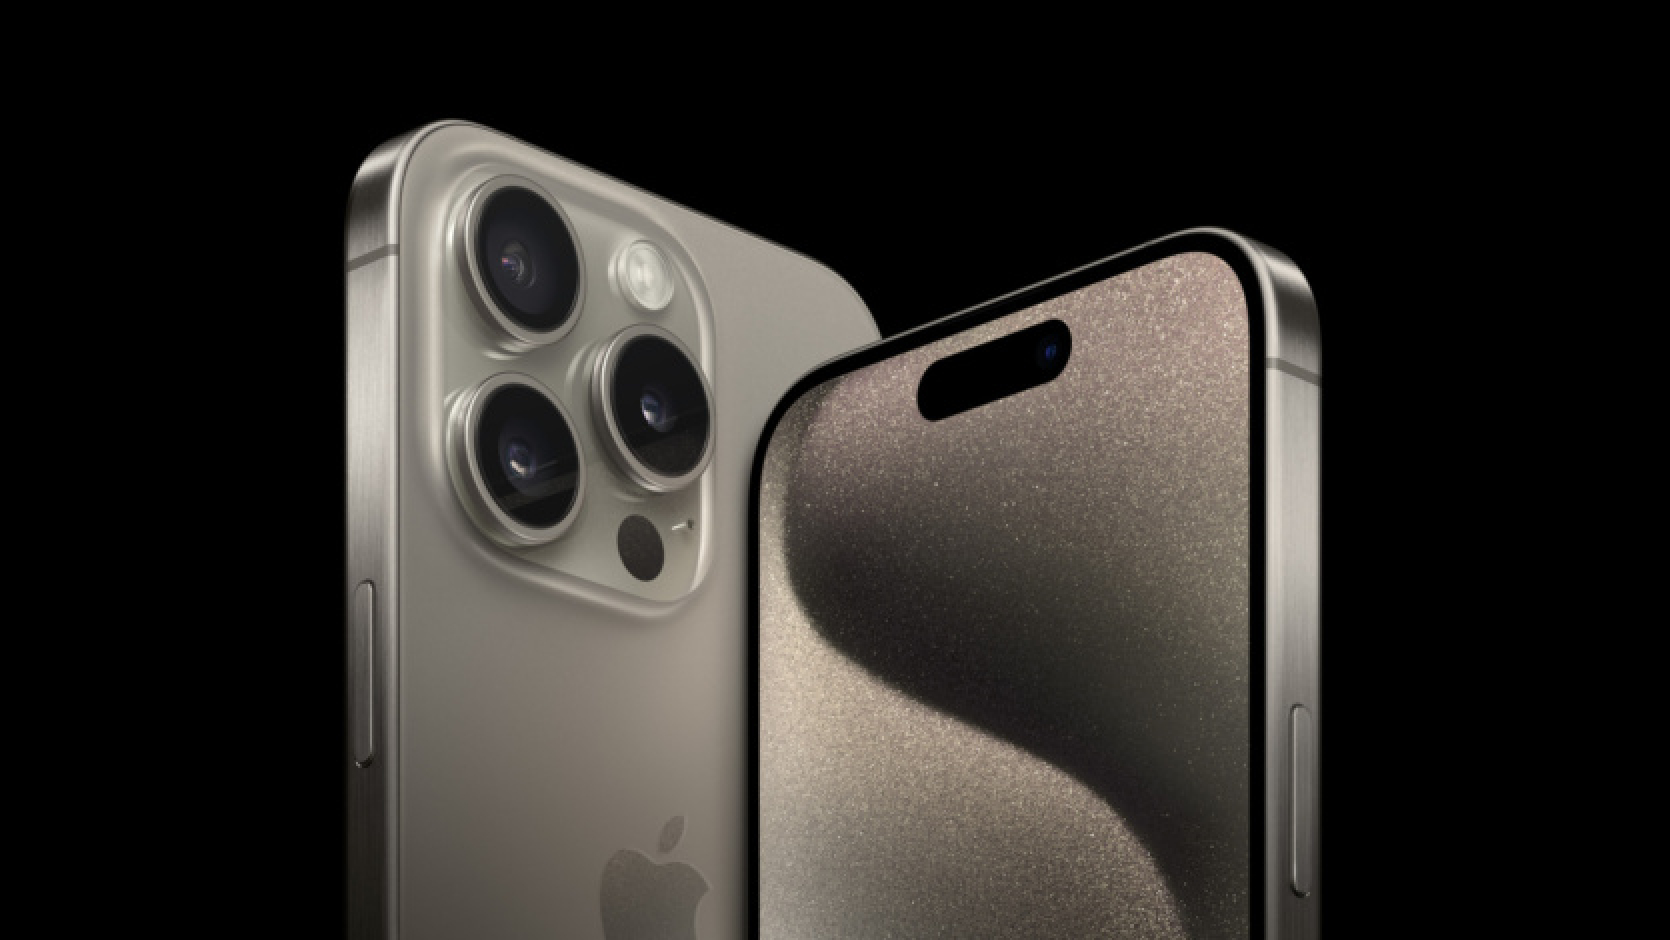 The iPhone 16 Pro camera is credited with an ultra-thin coating that will reduce glare and ghosting